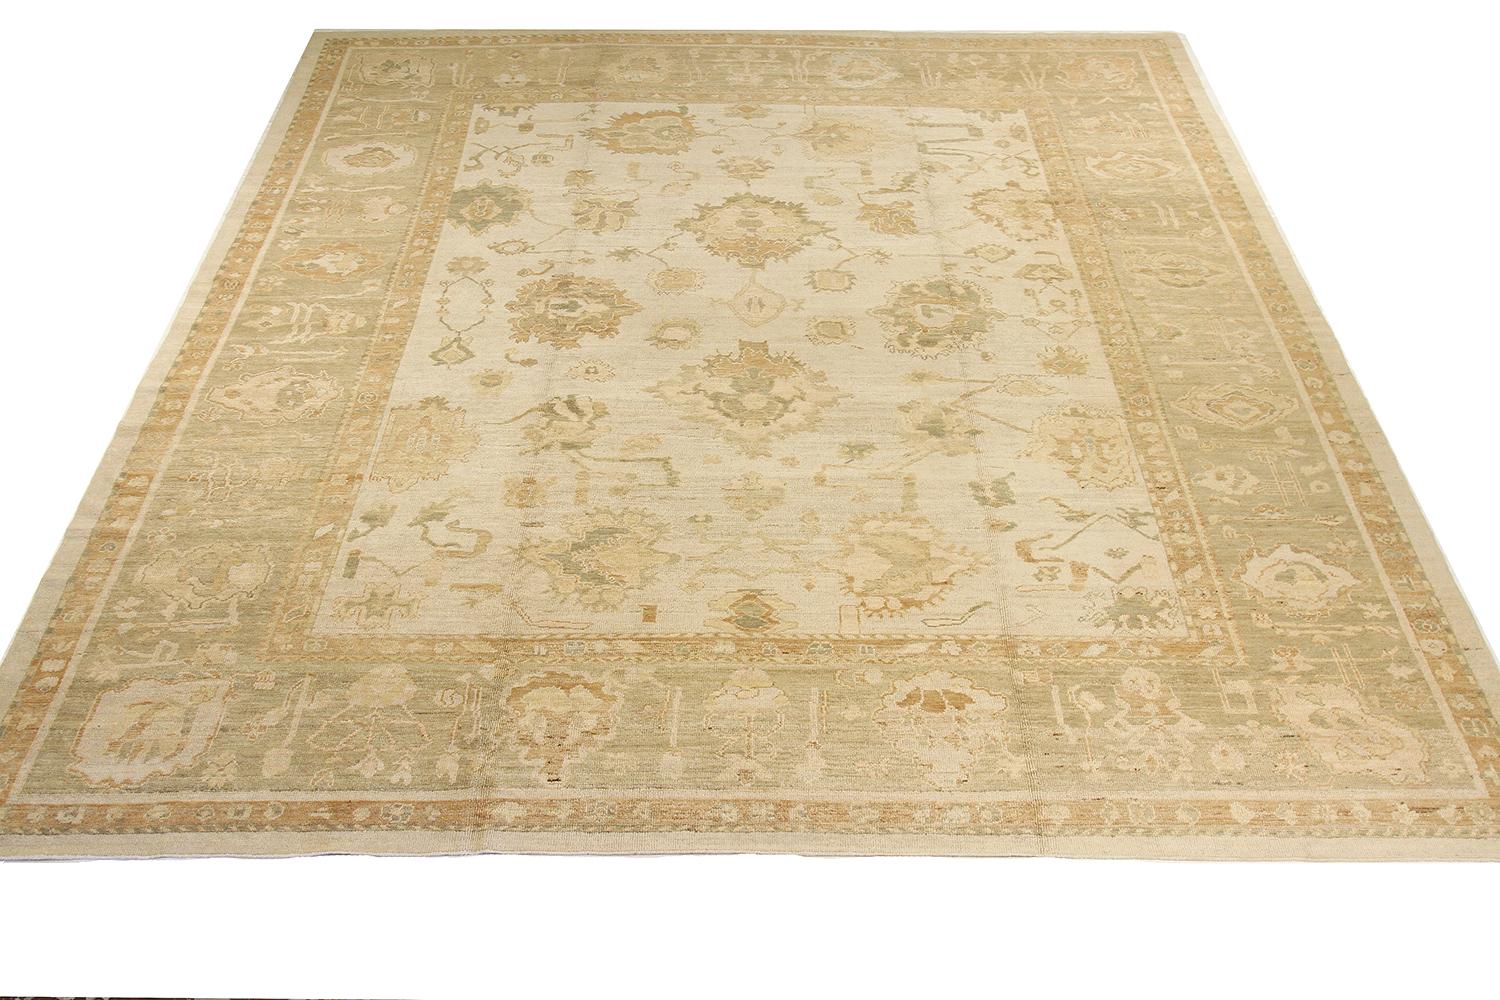 New Turkish rug made of handwoven sheep’s wool of the finest quality. It’s colored with organic vegetable dyes that are certified safe for humans and pets alike. It features flower details all-over associated with Oushak weaving from ancient